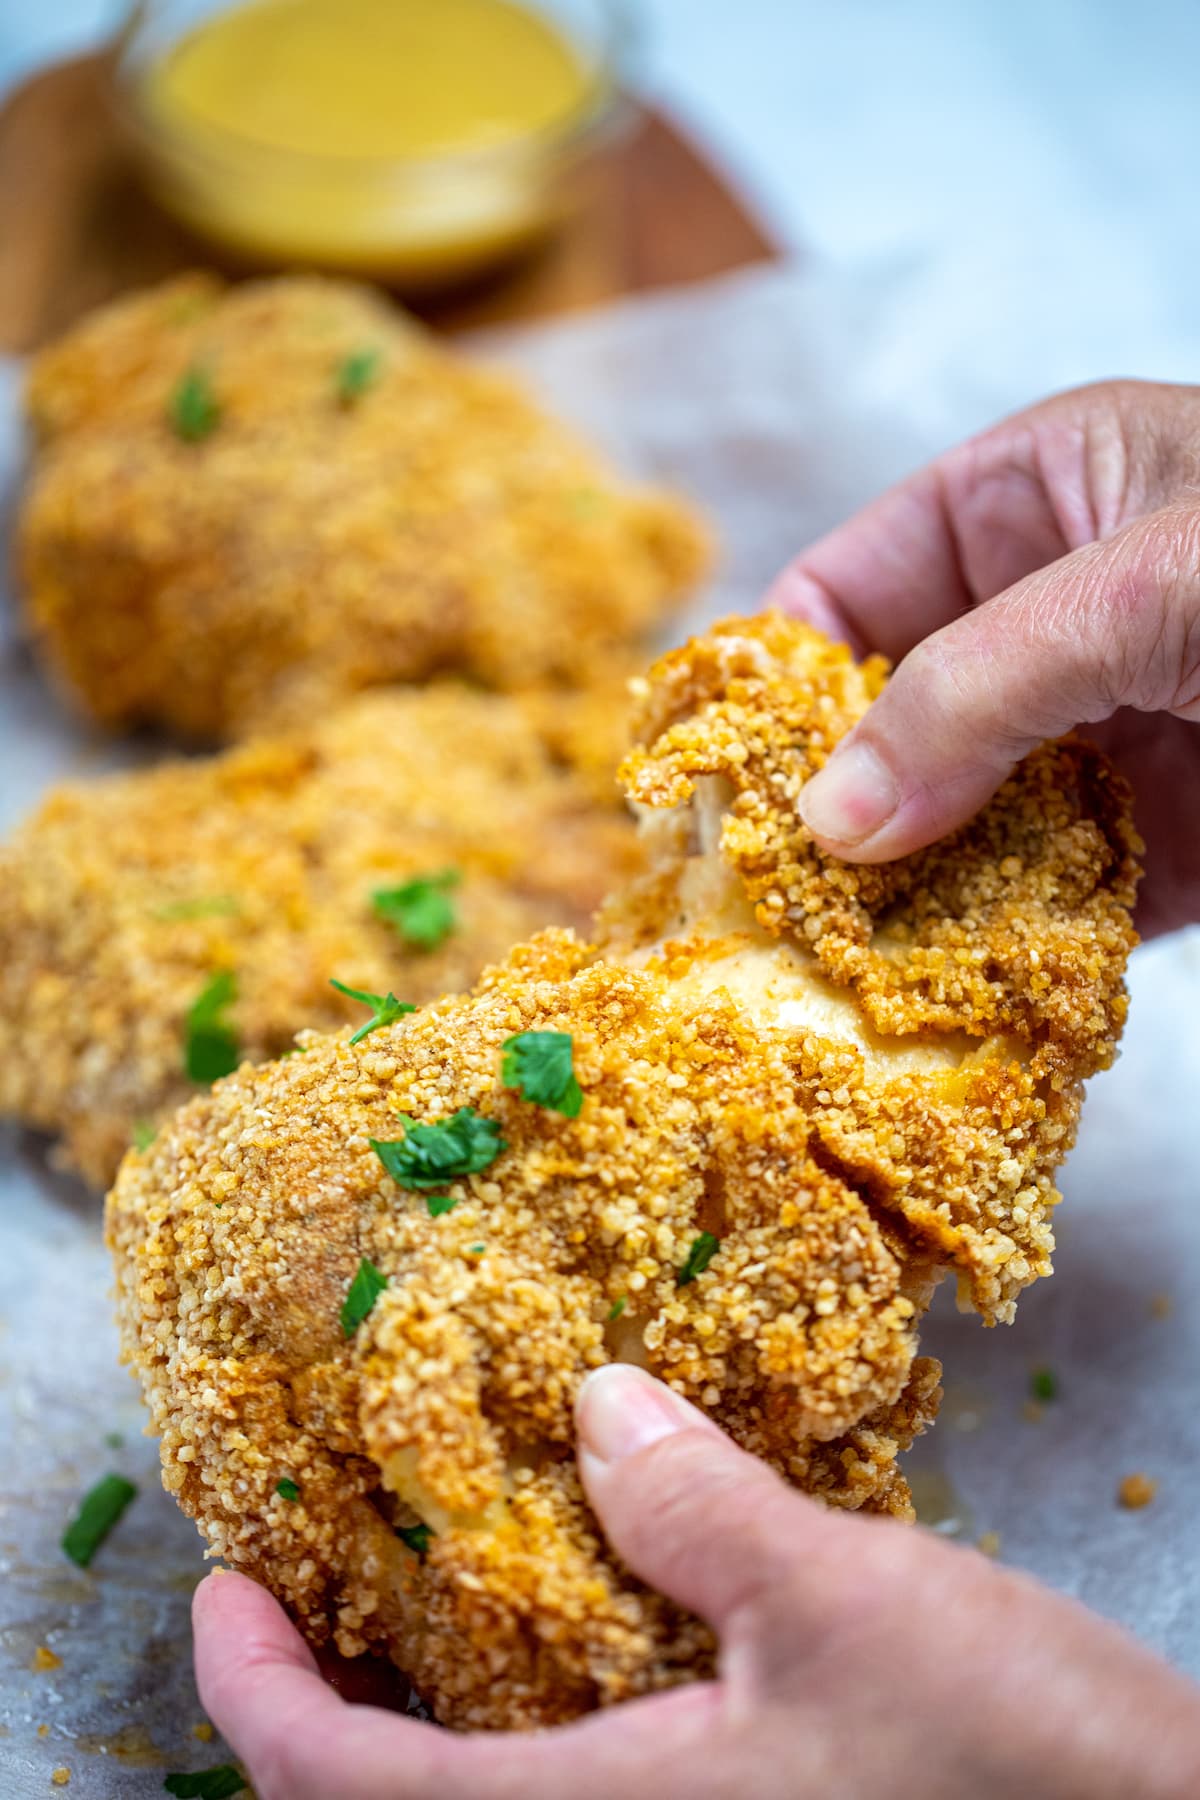 A piece of crispy chicken being pulled apart by two hands.